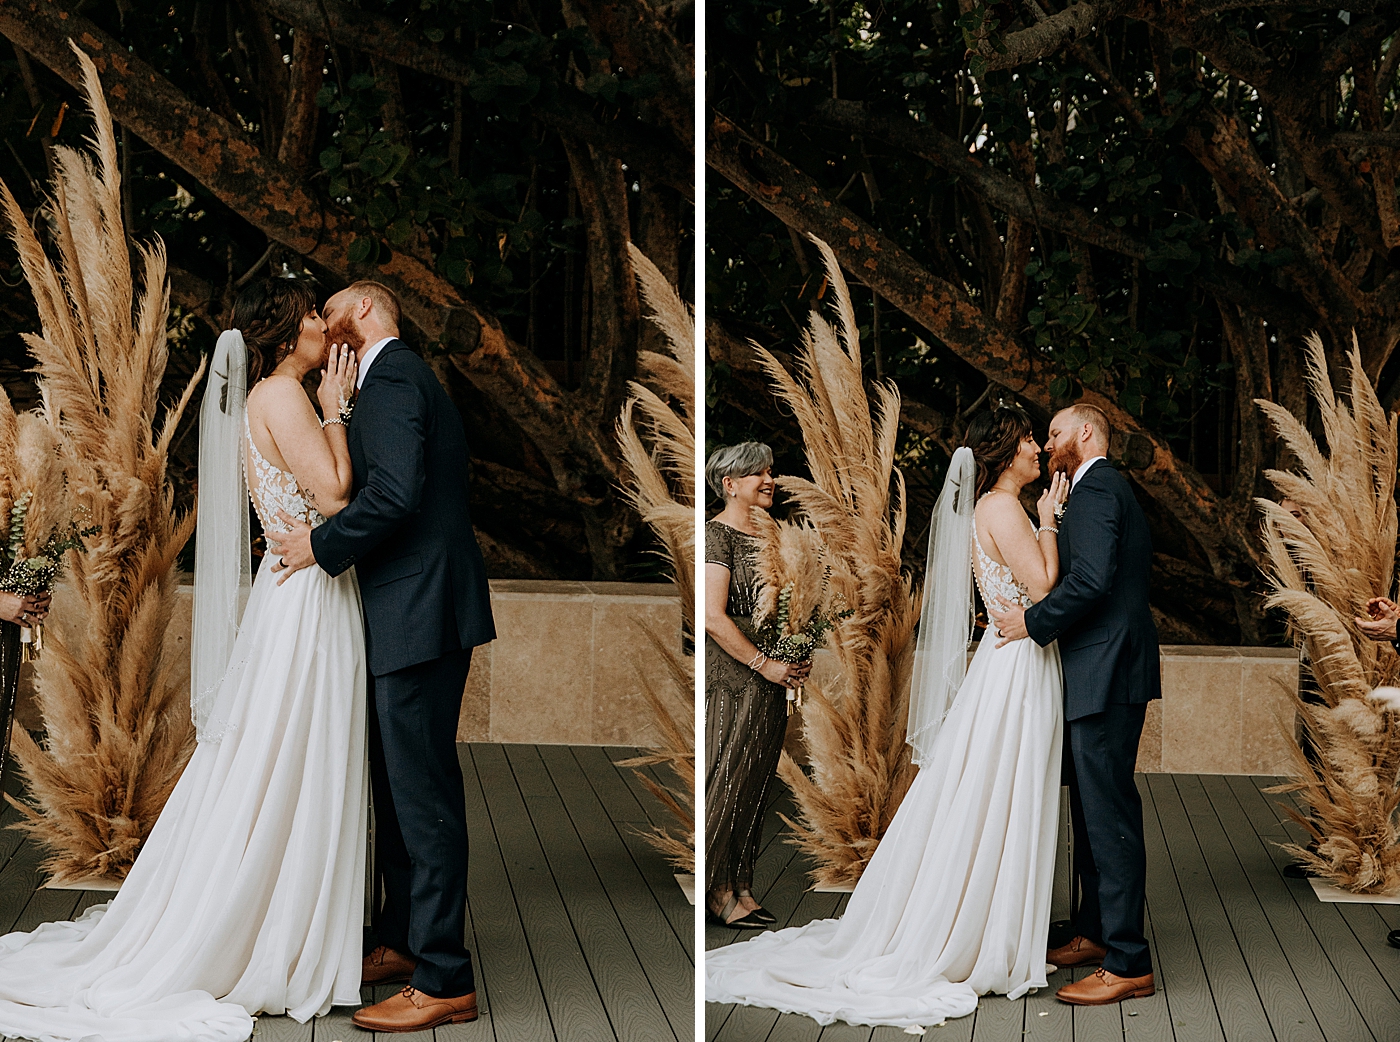 Bride and Groom just married and kissing Ceremony Historic Stranahan House Wedding Photography captured by South Florida Wedding Photographer Maggie Alvarez Photography